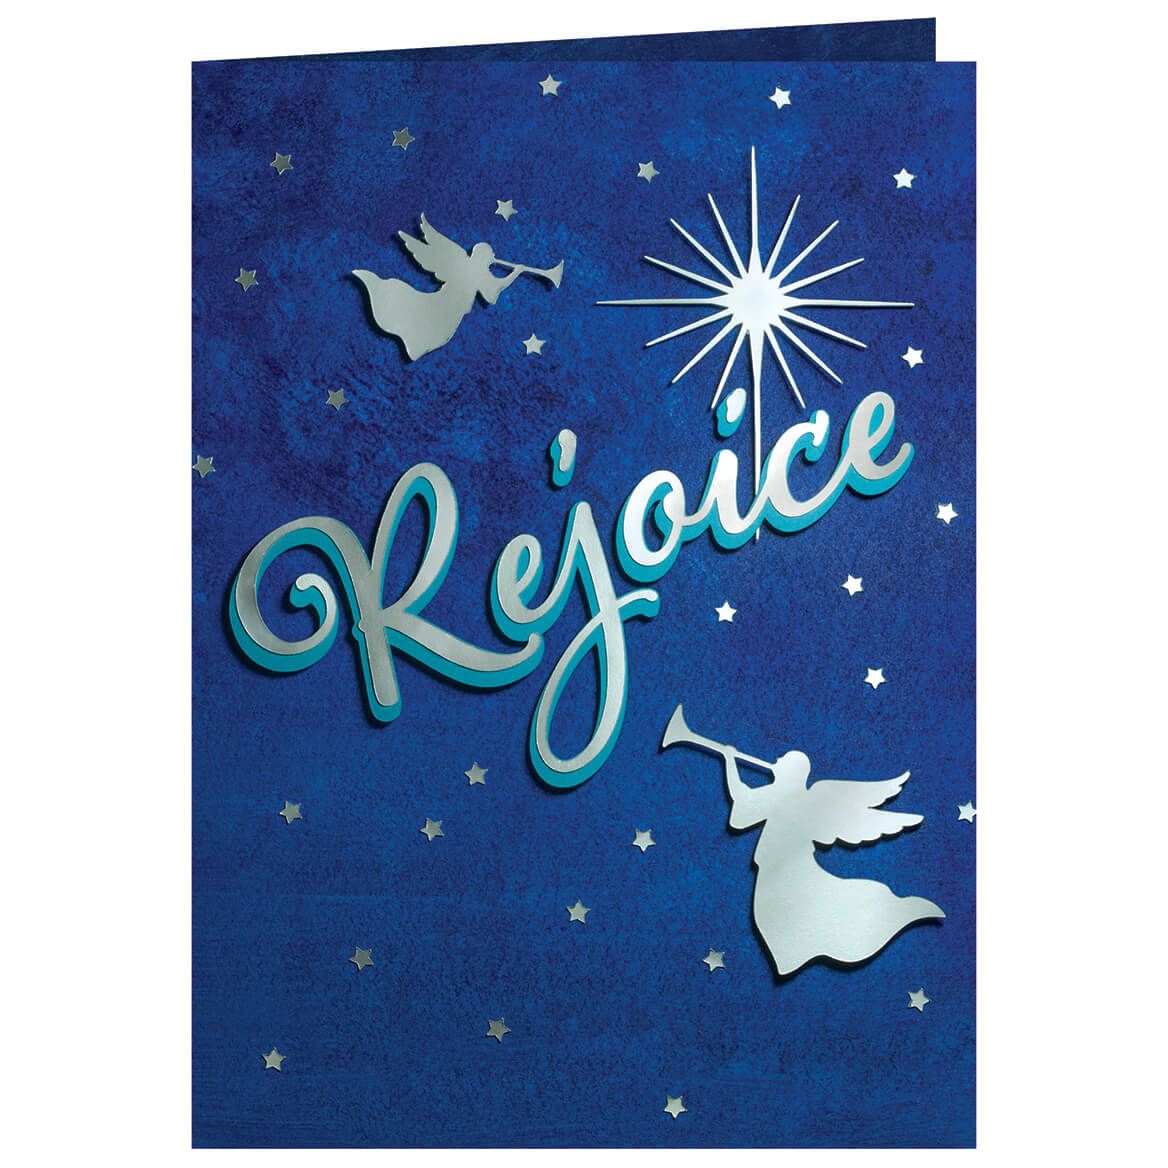 Personalized Nativity Scene Pop-Up Christmas Cards, Set of 20 + '-' + 374975